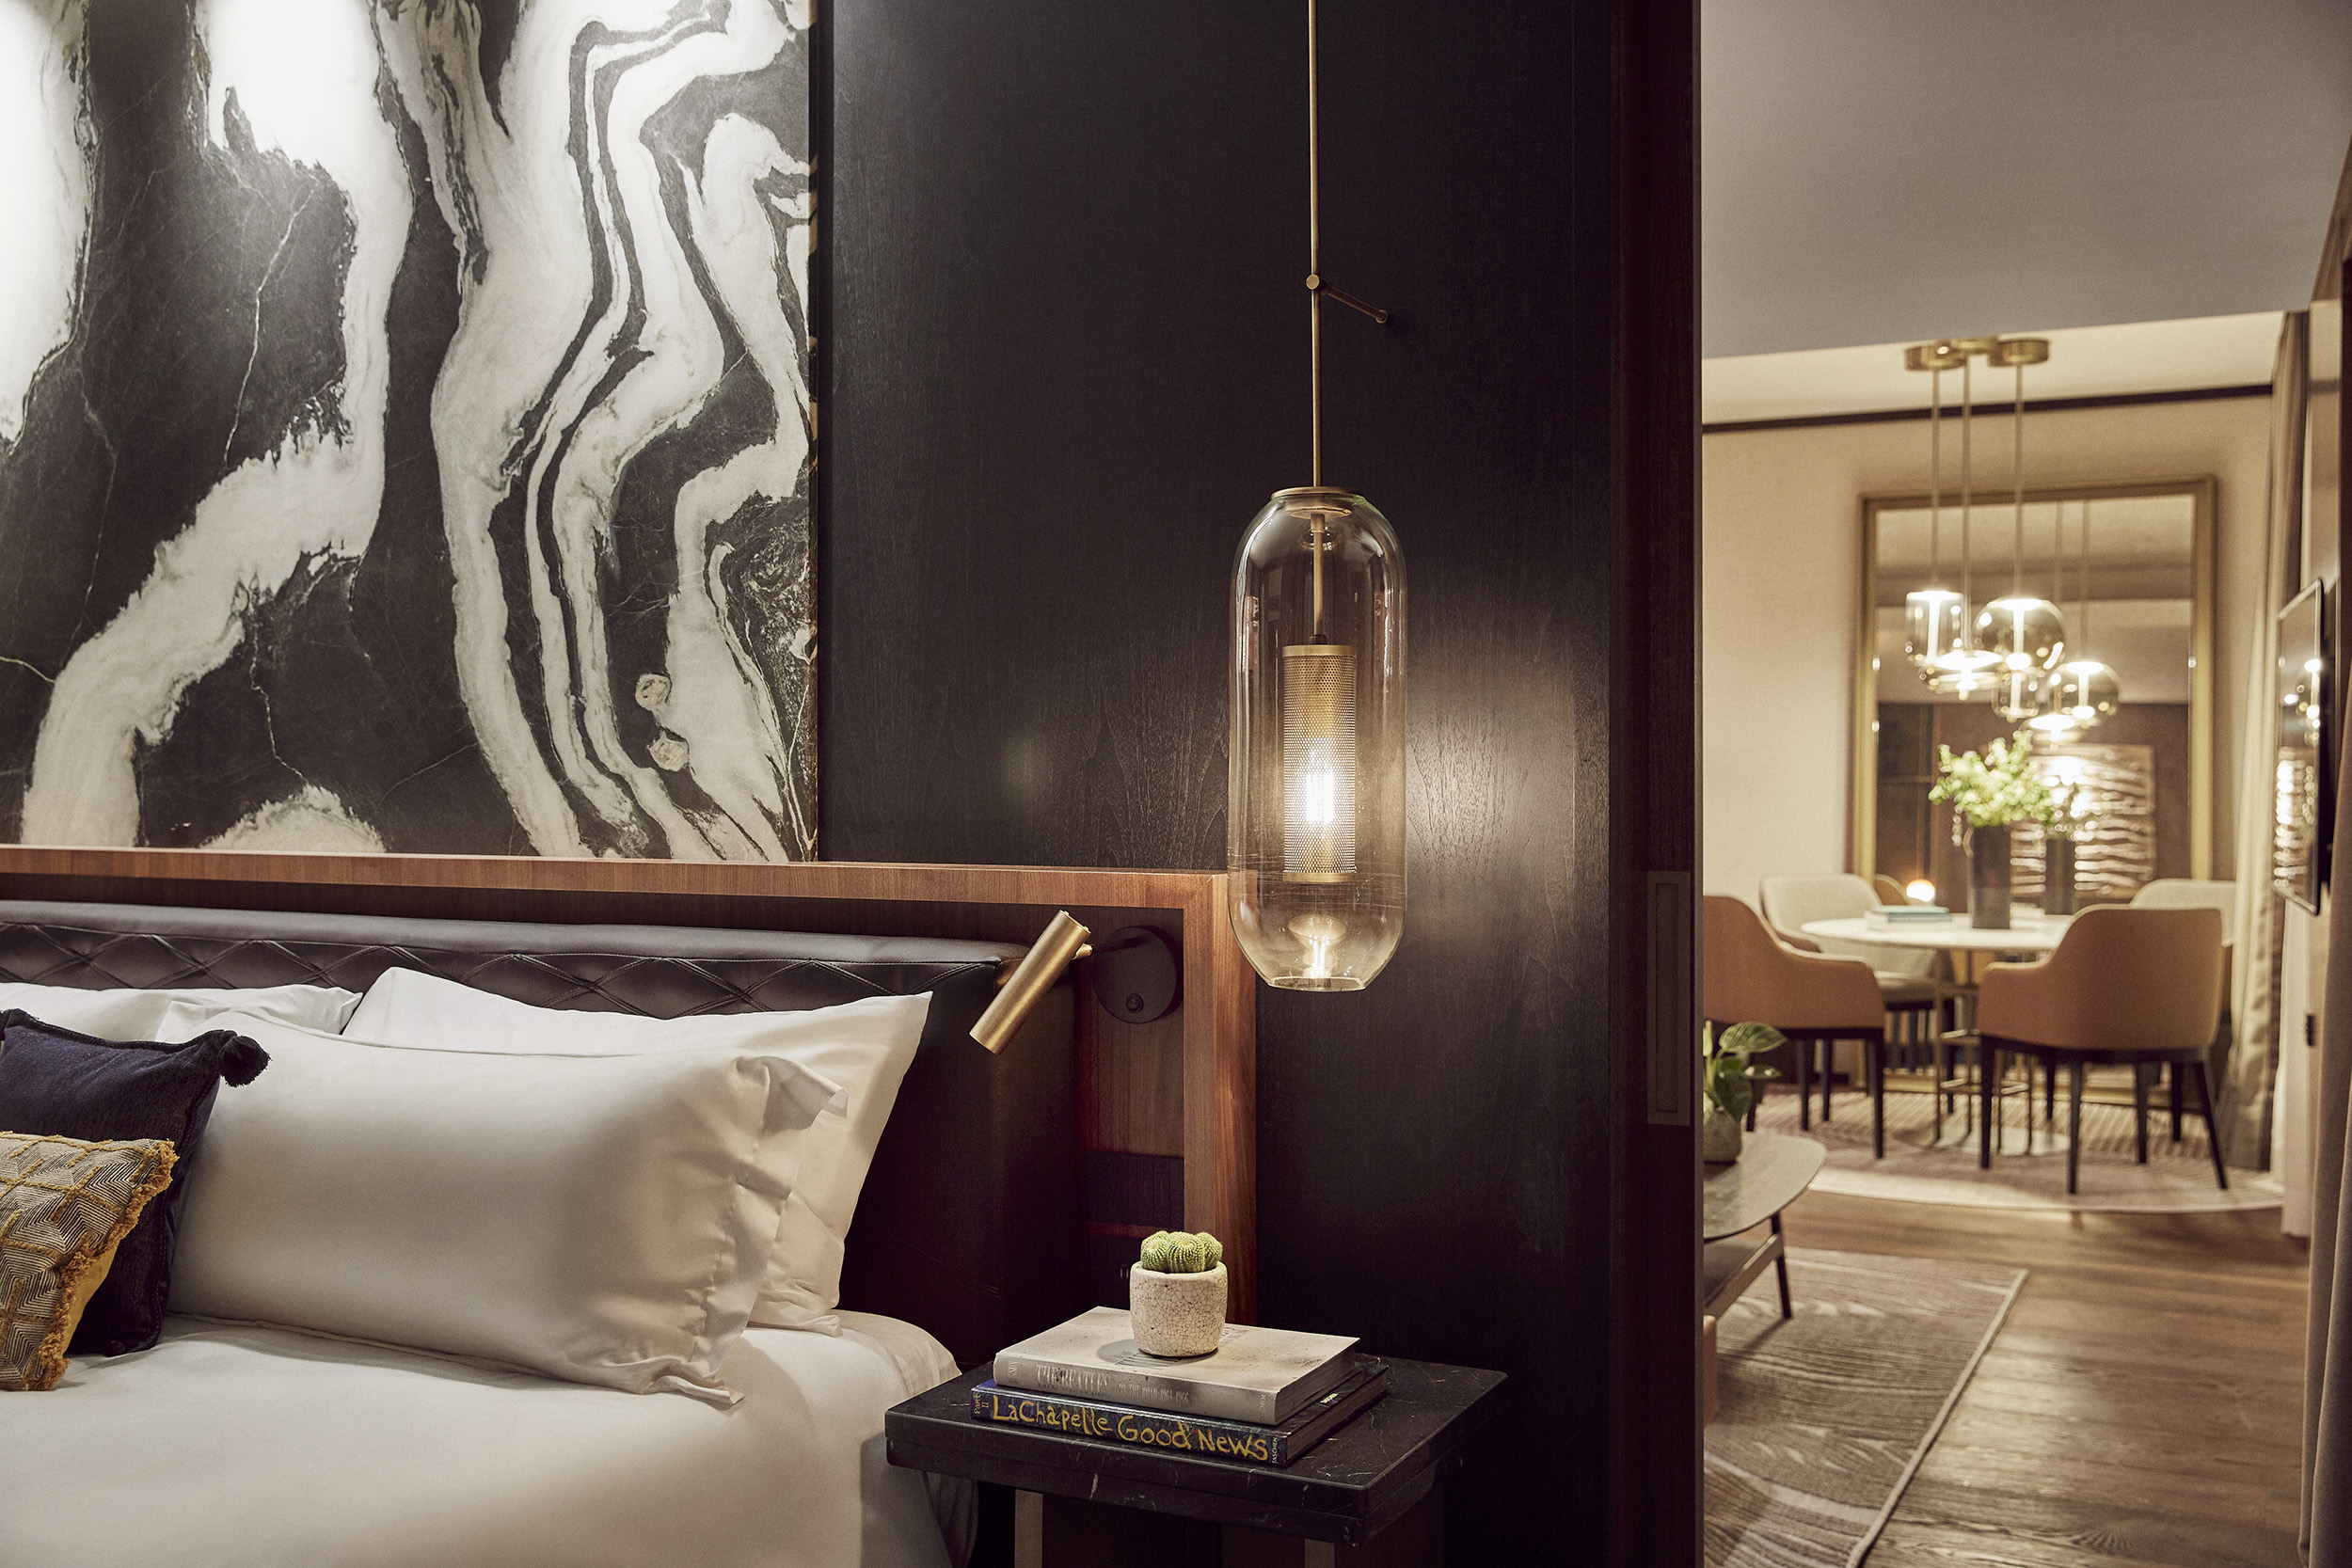 Thompson Madrid guest rooms have been carefully designed and decorated to make guests to discover a new sense of modern luxury. Guest rooms feature rich wooden accents and furniture, as well as blown glass light fixtures.